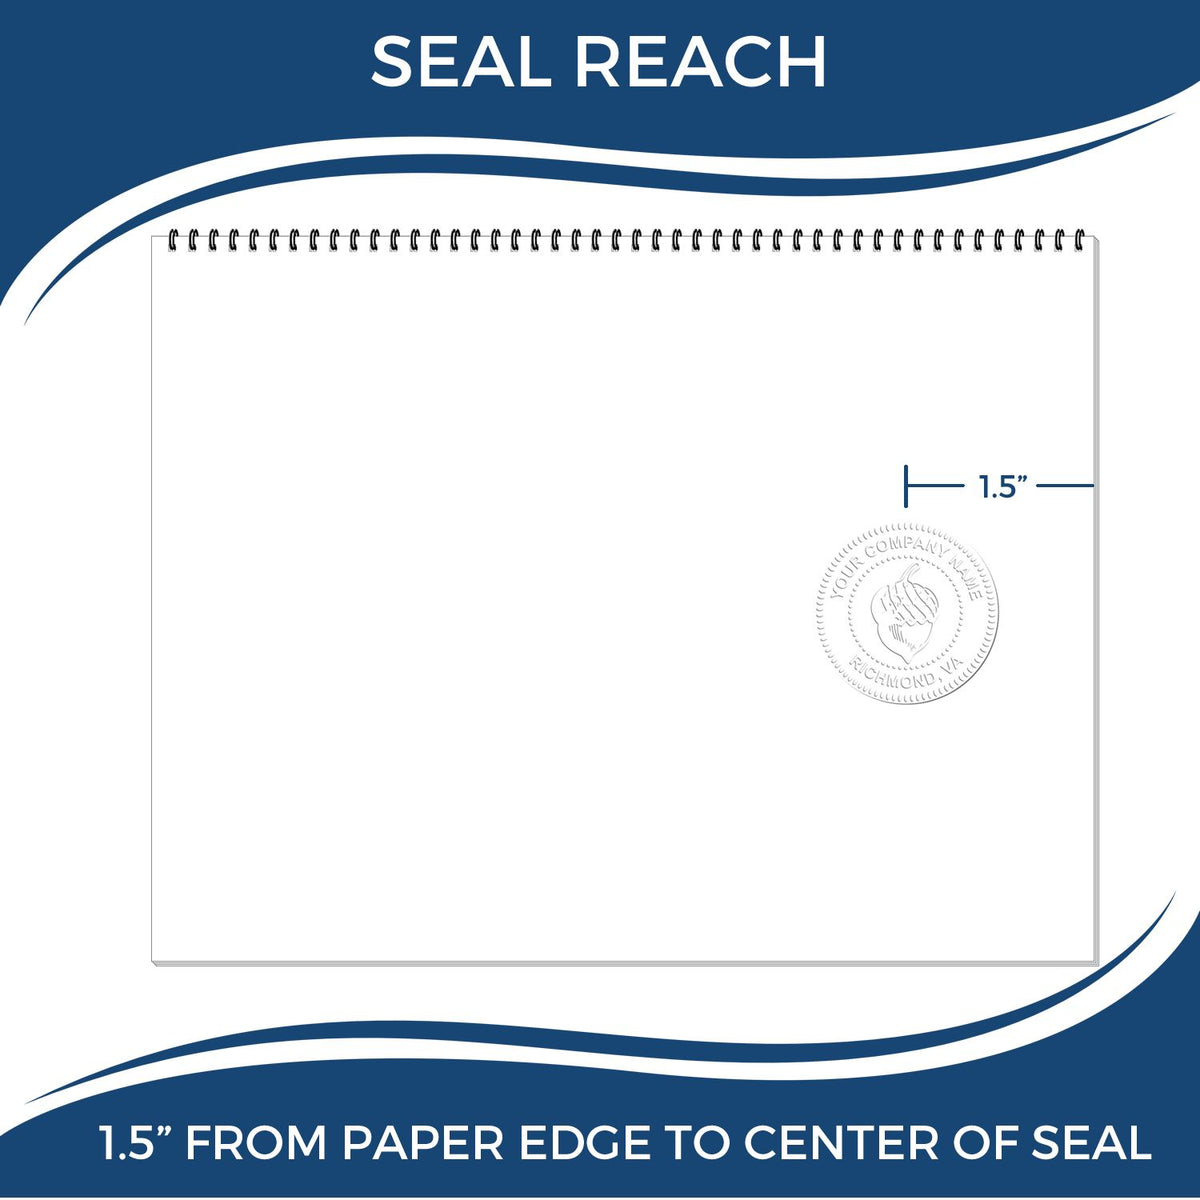 An infographic showing the seal reach which is represented by a ruler and a miniature seal image of the Hybrid New York Landscape Architect Seal